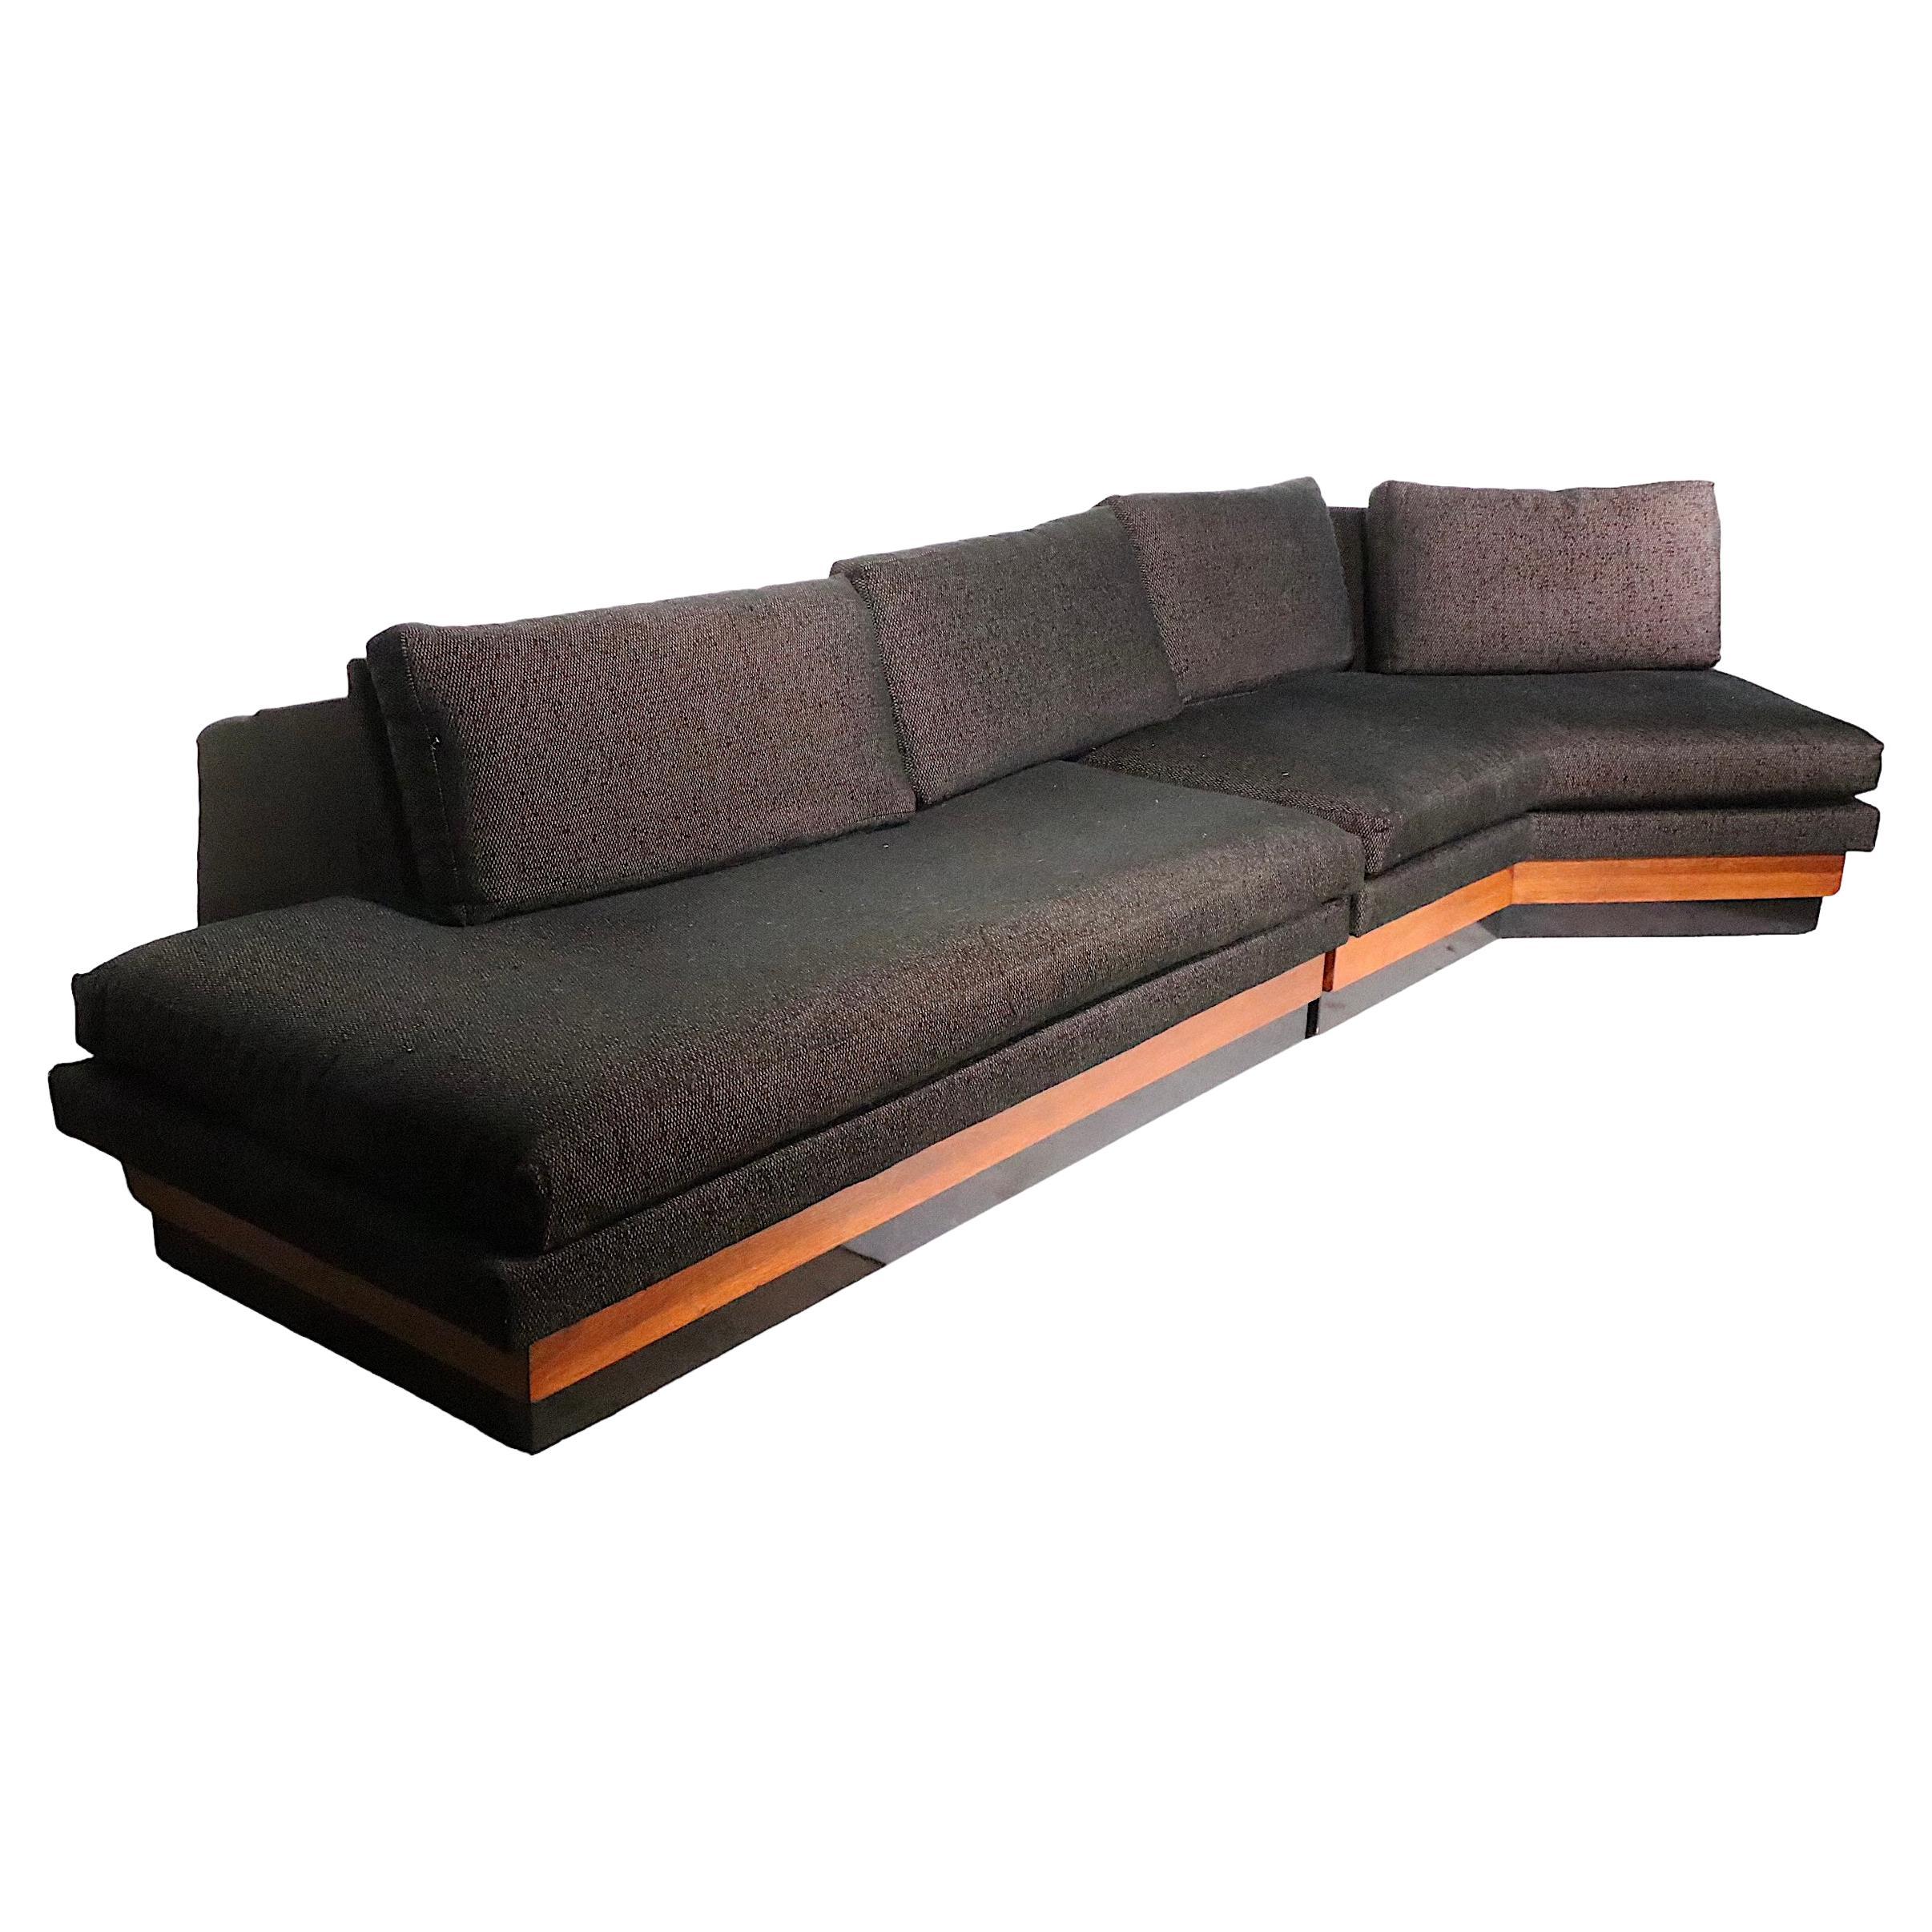 Mid Century Sectional Sofa by Adrian Pearsall for Craft Associates c 1960's